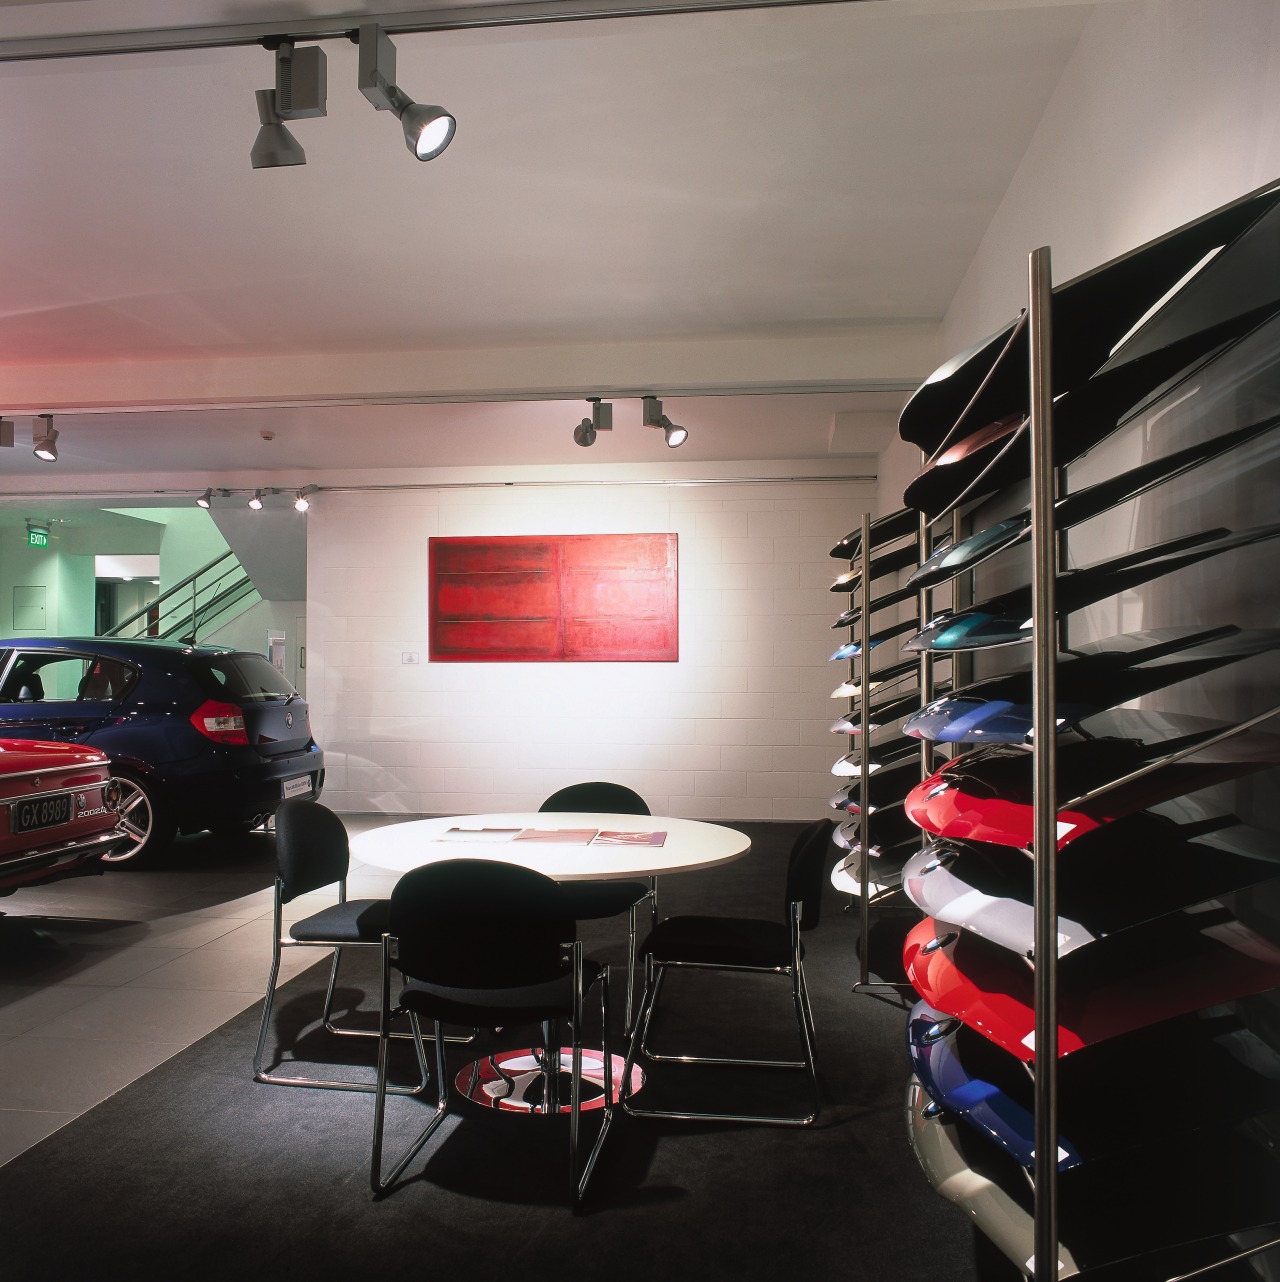 BMW showroom with white walls, shelving for parts ceiling, interior design, gray, black